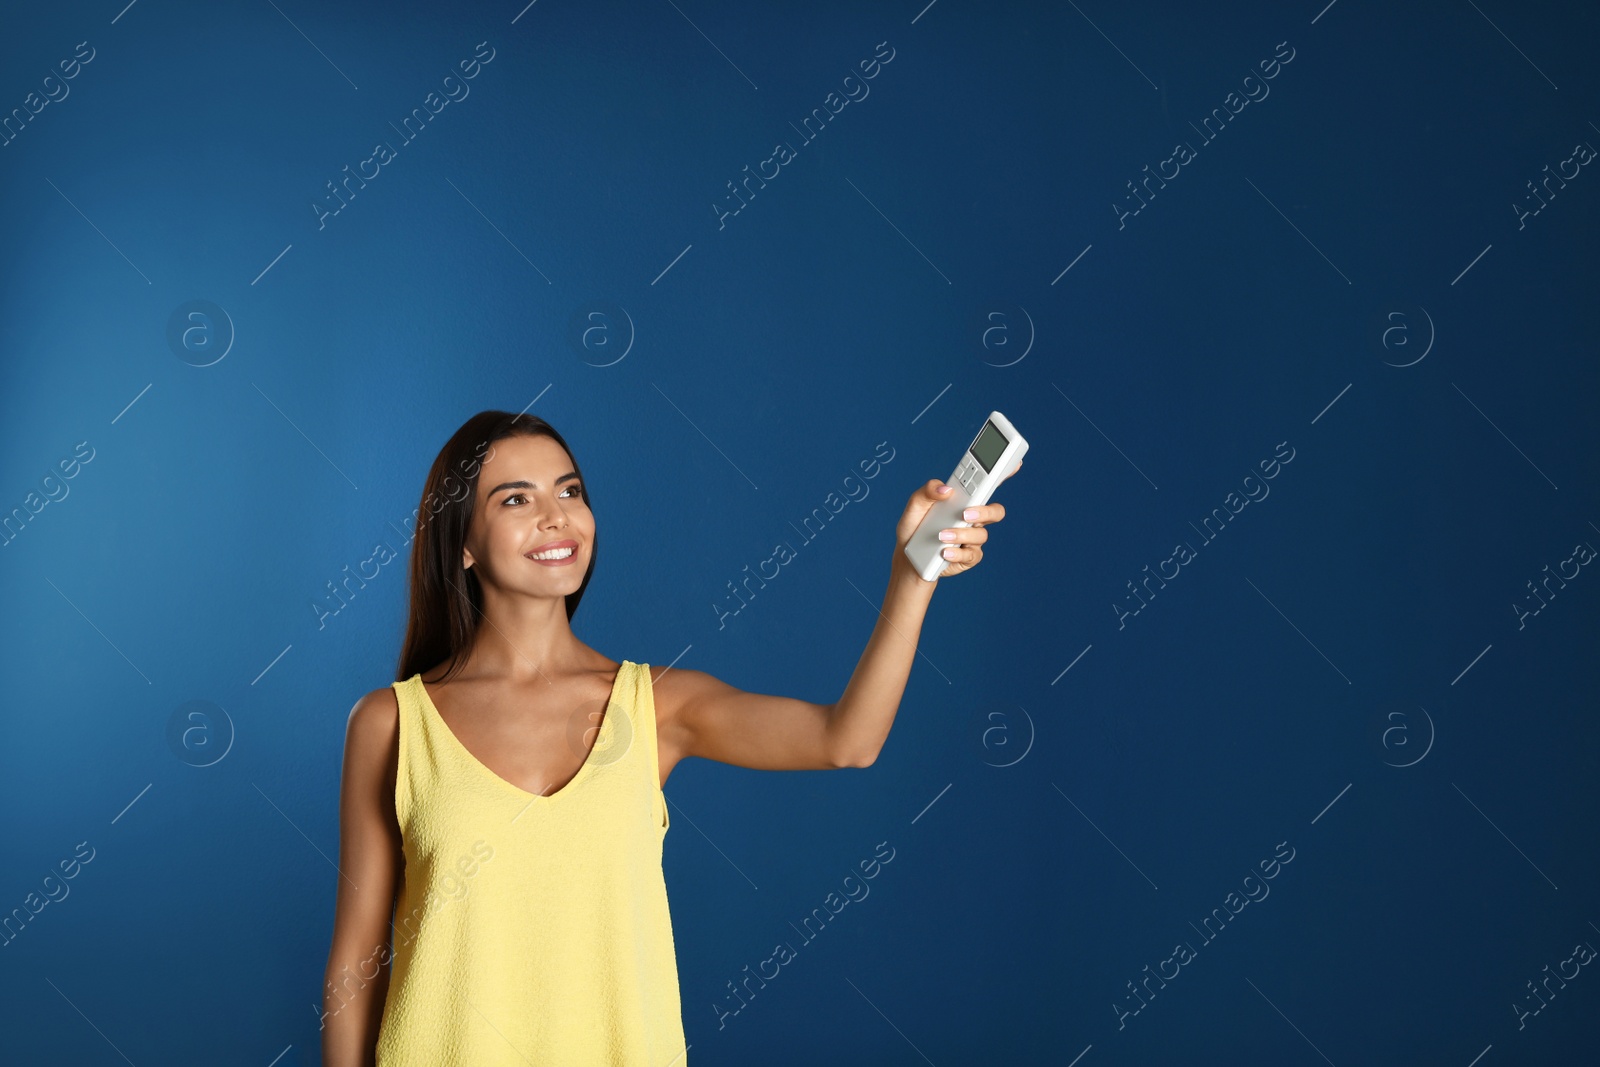 Photo of Young woman turning on air conditioner against blue background